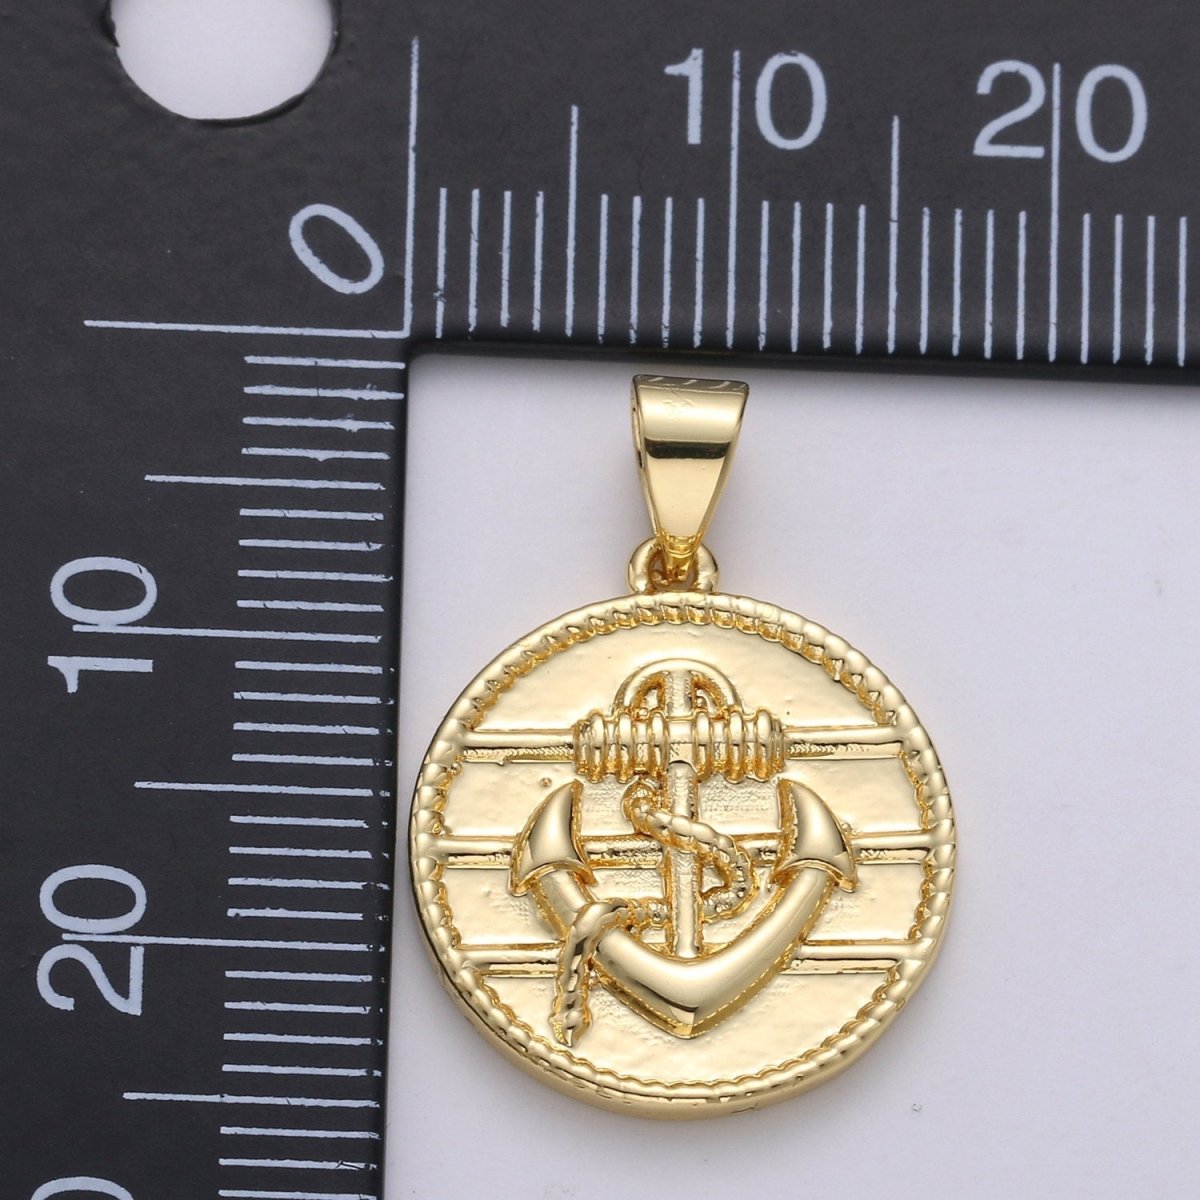 14K Gold Filled Anchor Pendant Craft Supplies For Necklace Bracelet Jewelry Making Nautical Jewelry Making Supply J-004 - DLUXCA